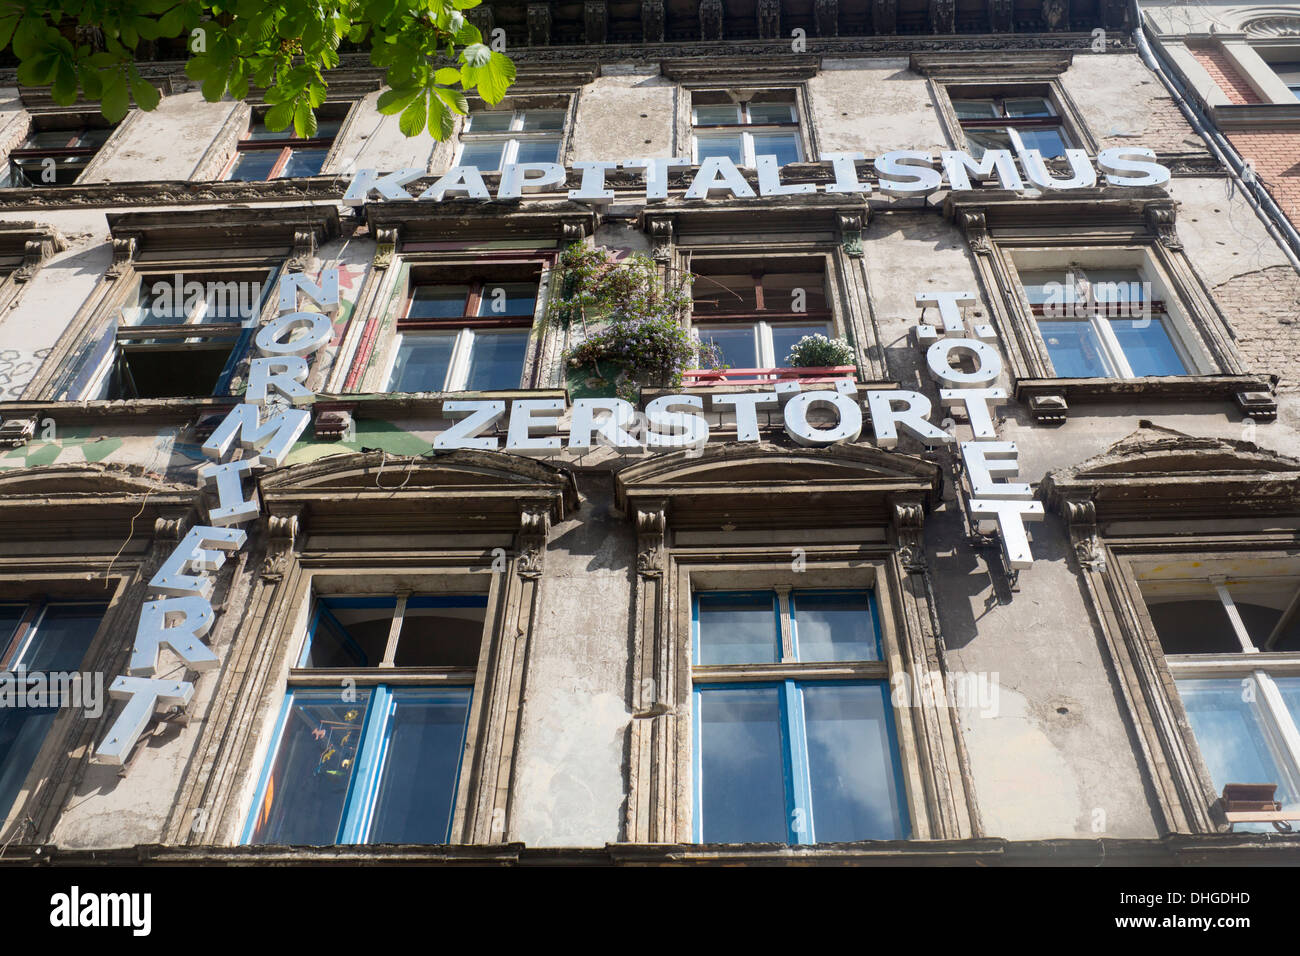 Squat in Prenzlauer Berg with anti-capitalist message on front of building Berlin Germany Stock Photo